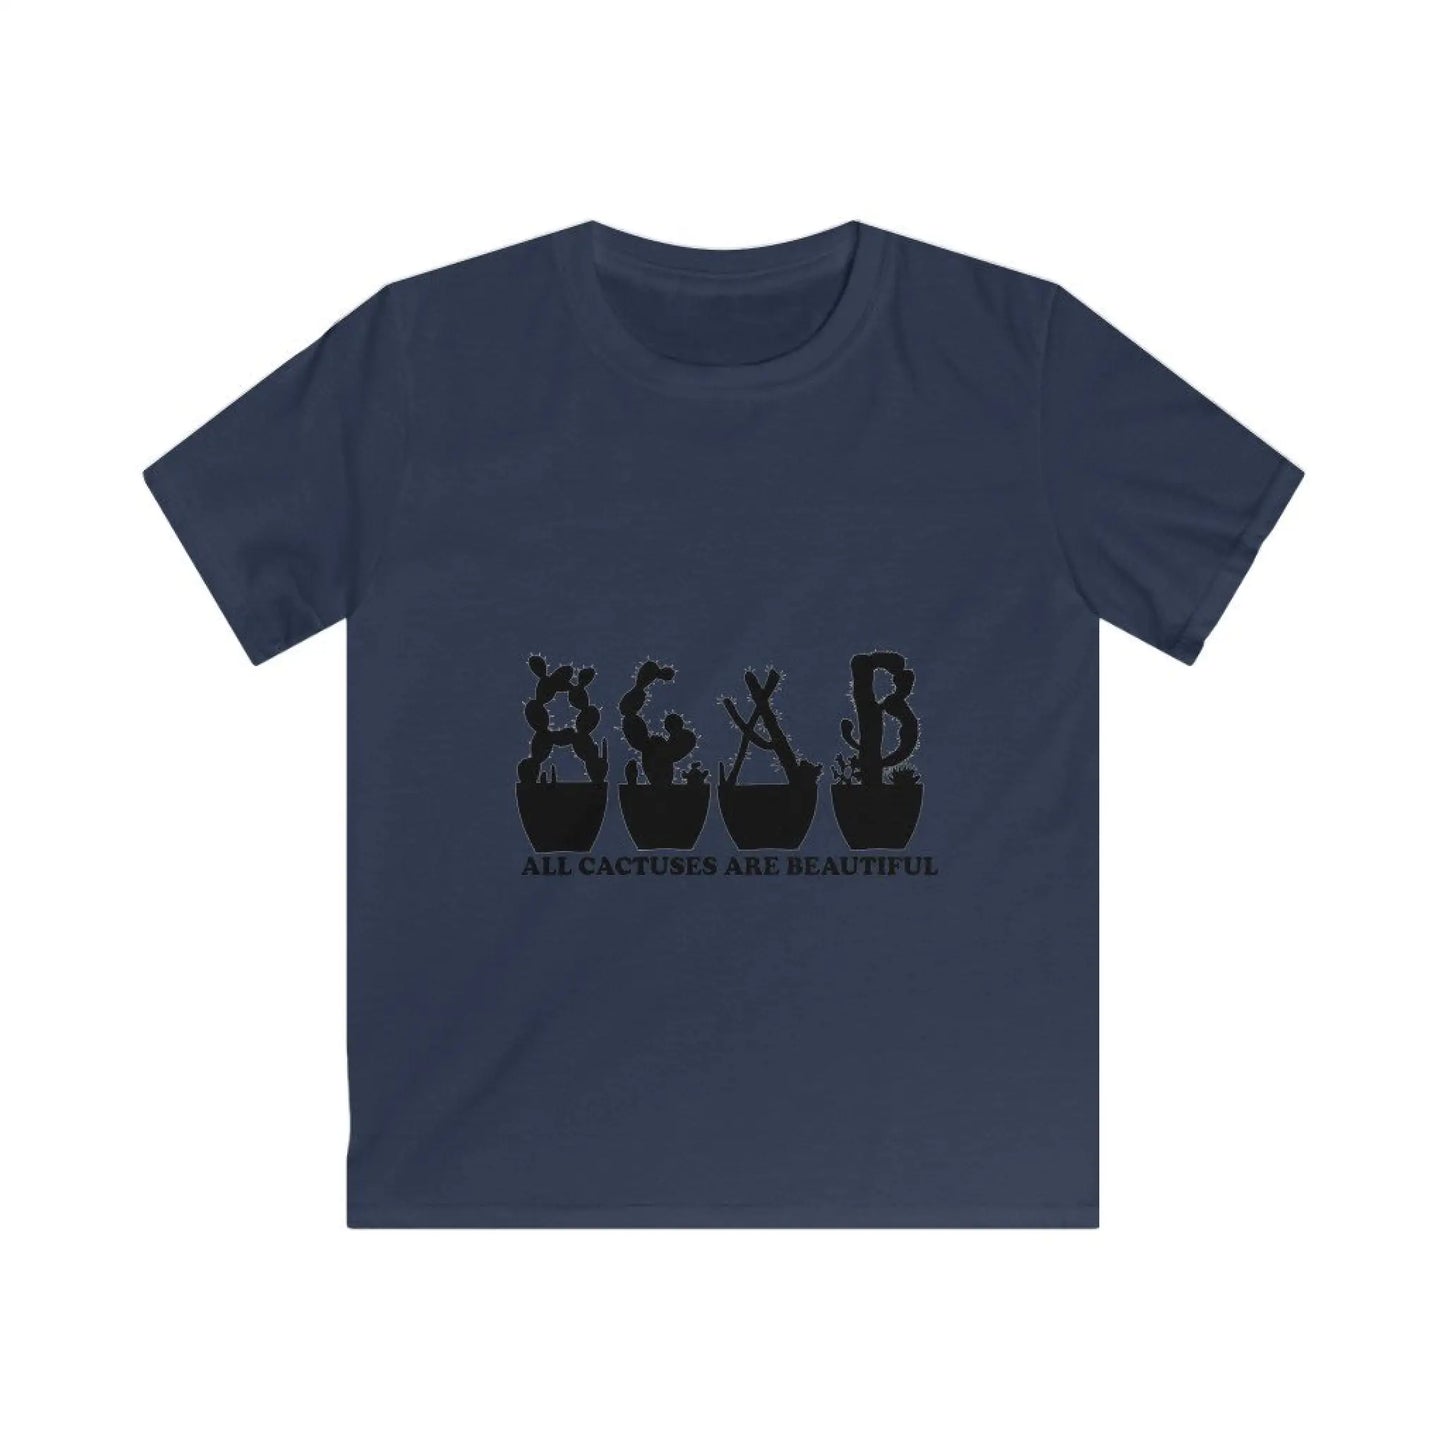 Kids Tee - All Cactuses Are Beautiful - S / Navy - clothes